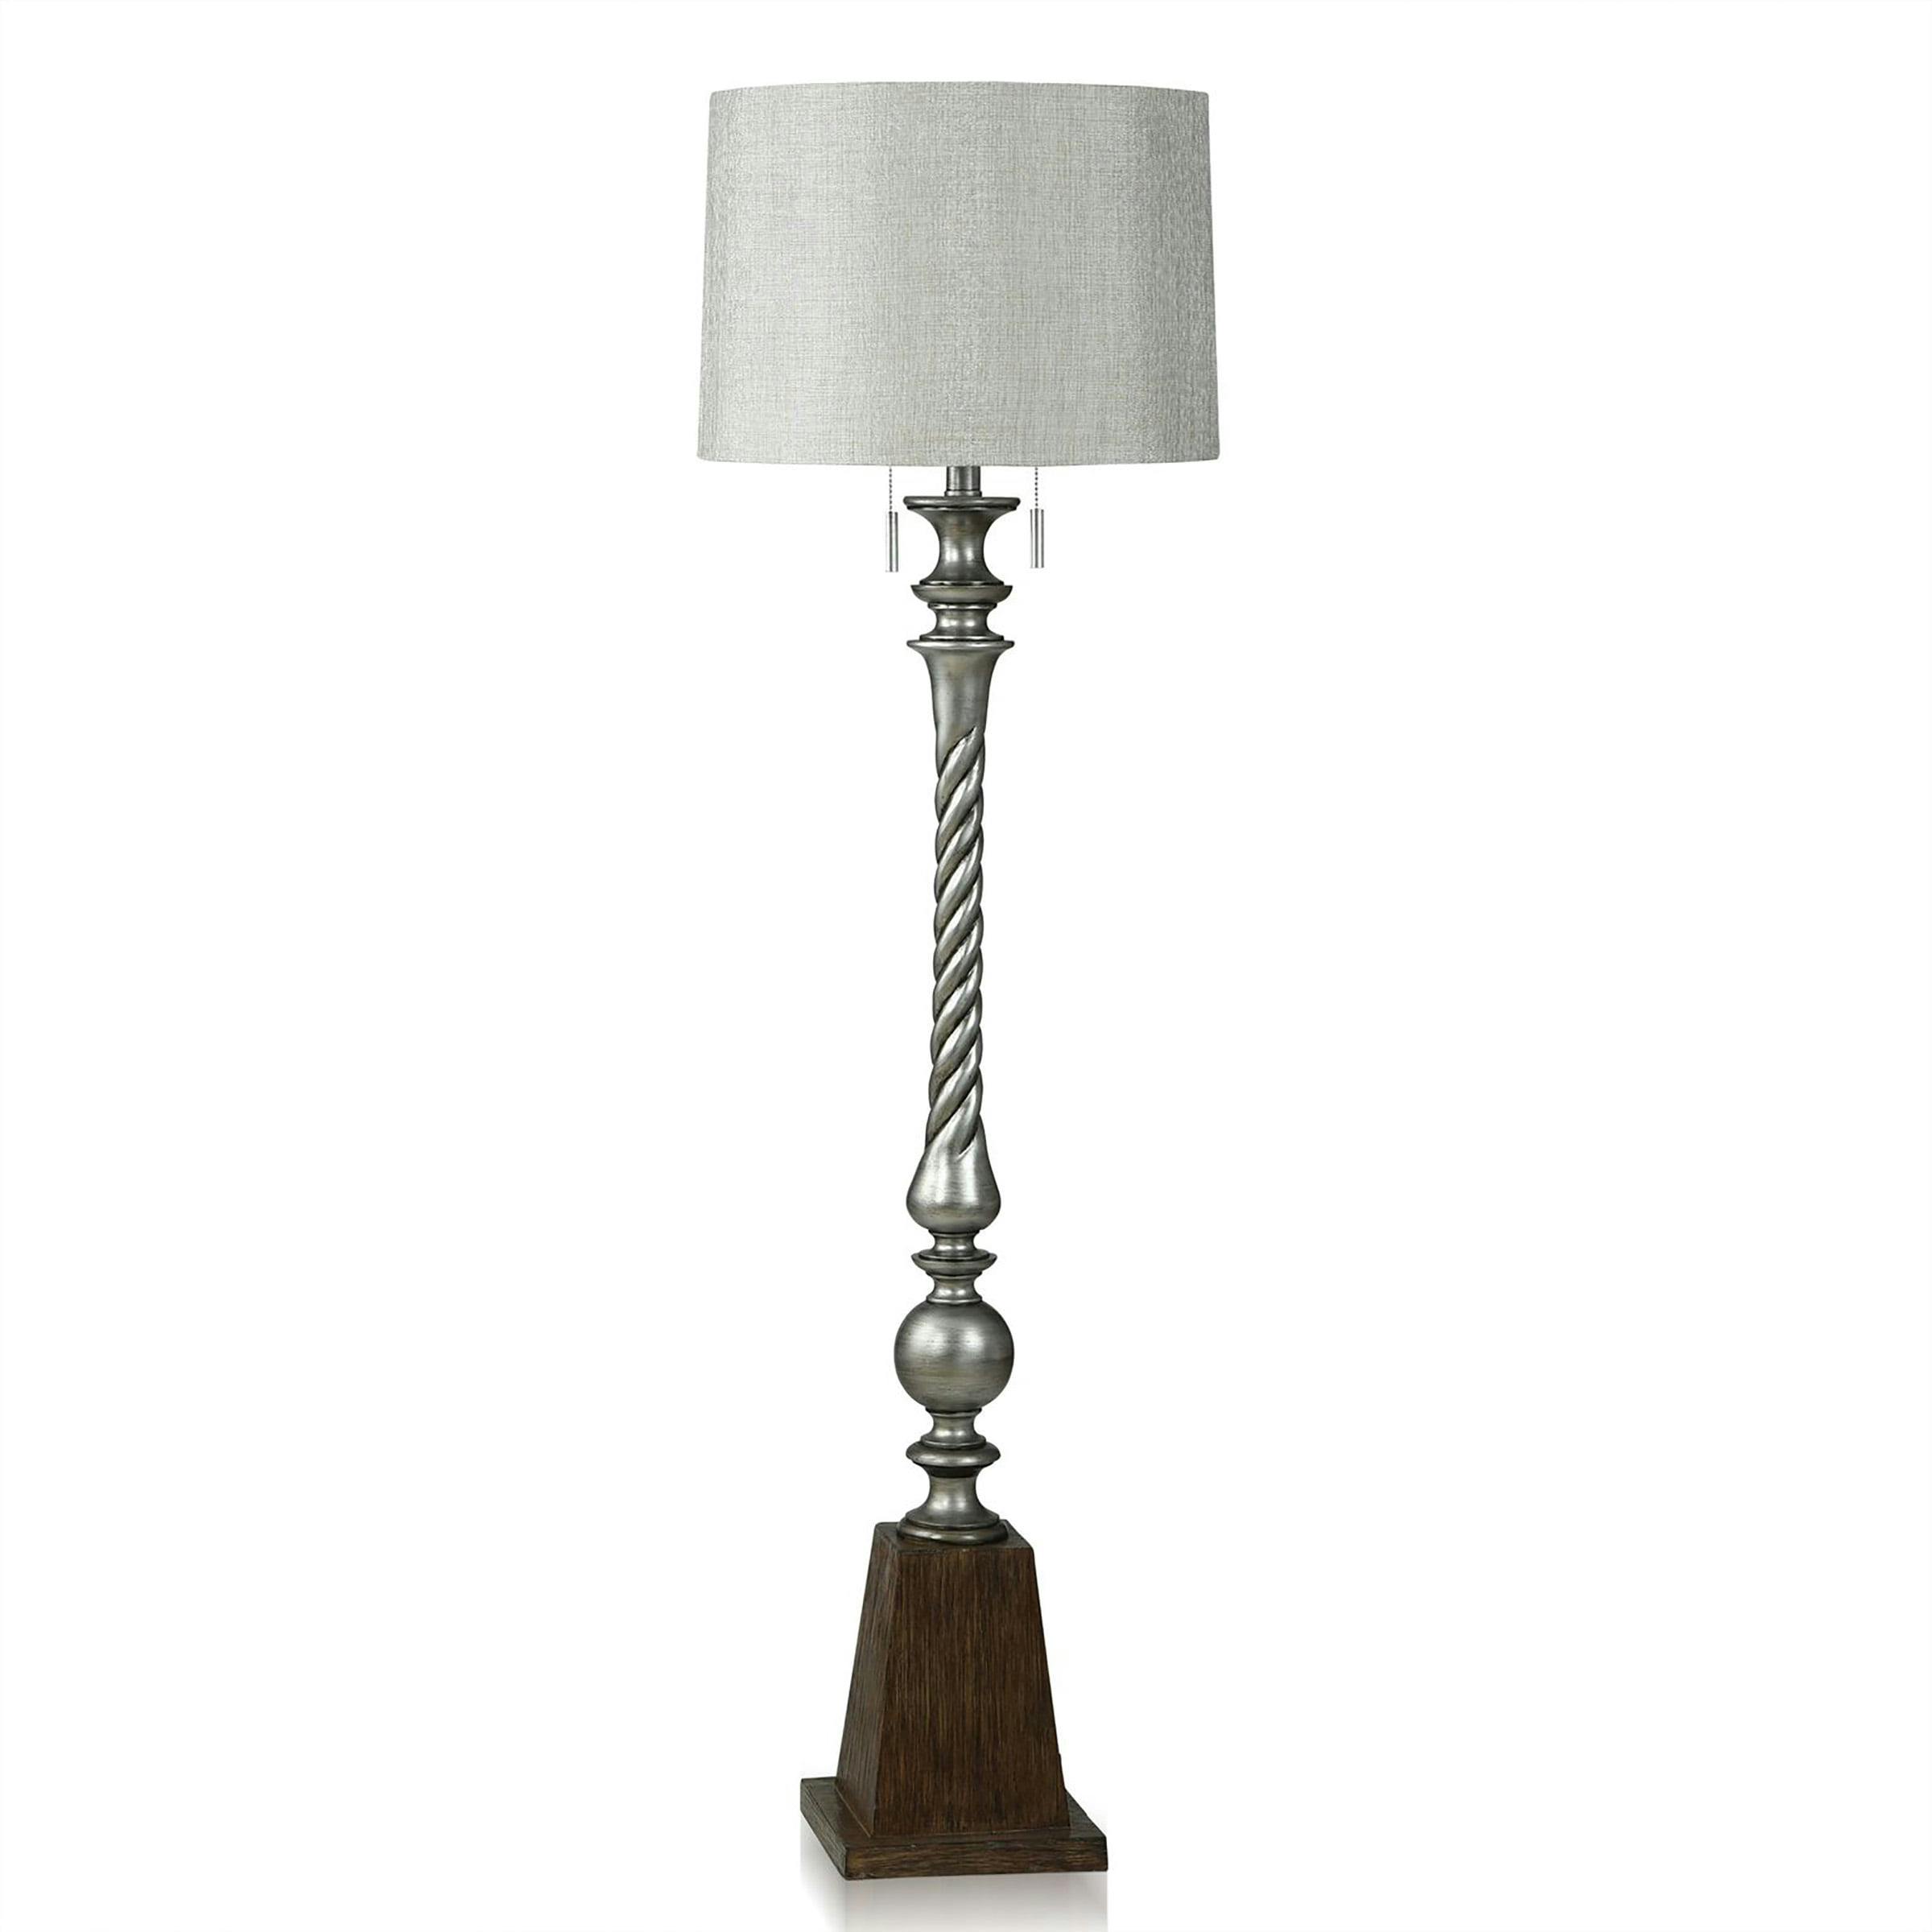 Elegant Silver Swirl 65" Floor Lamp with Double Pull Chain